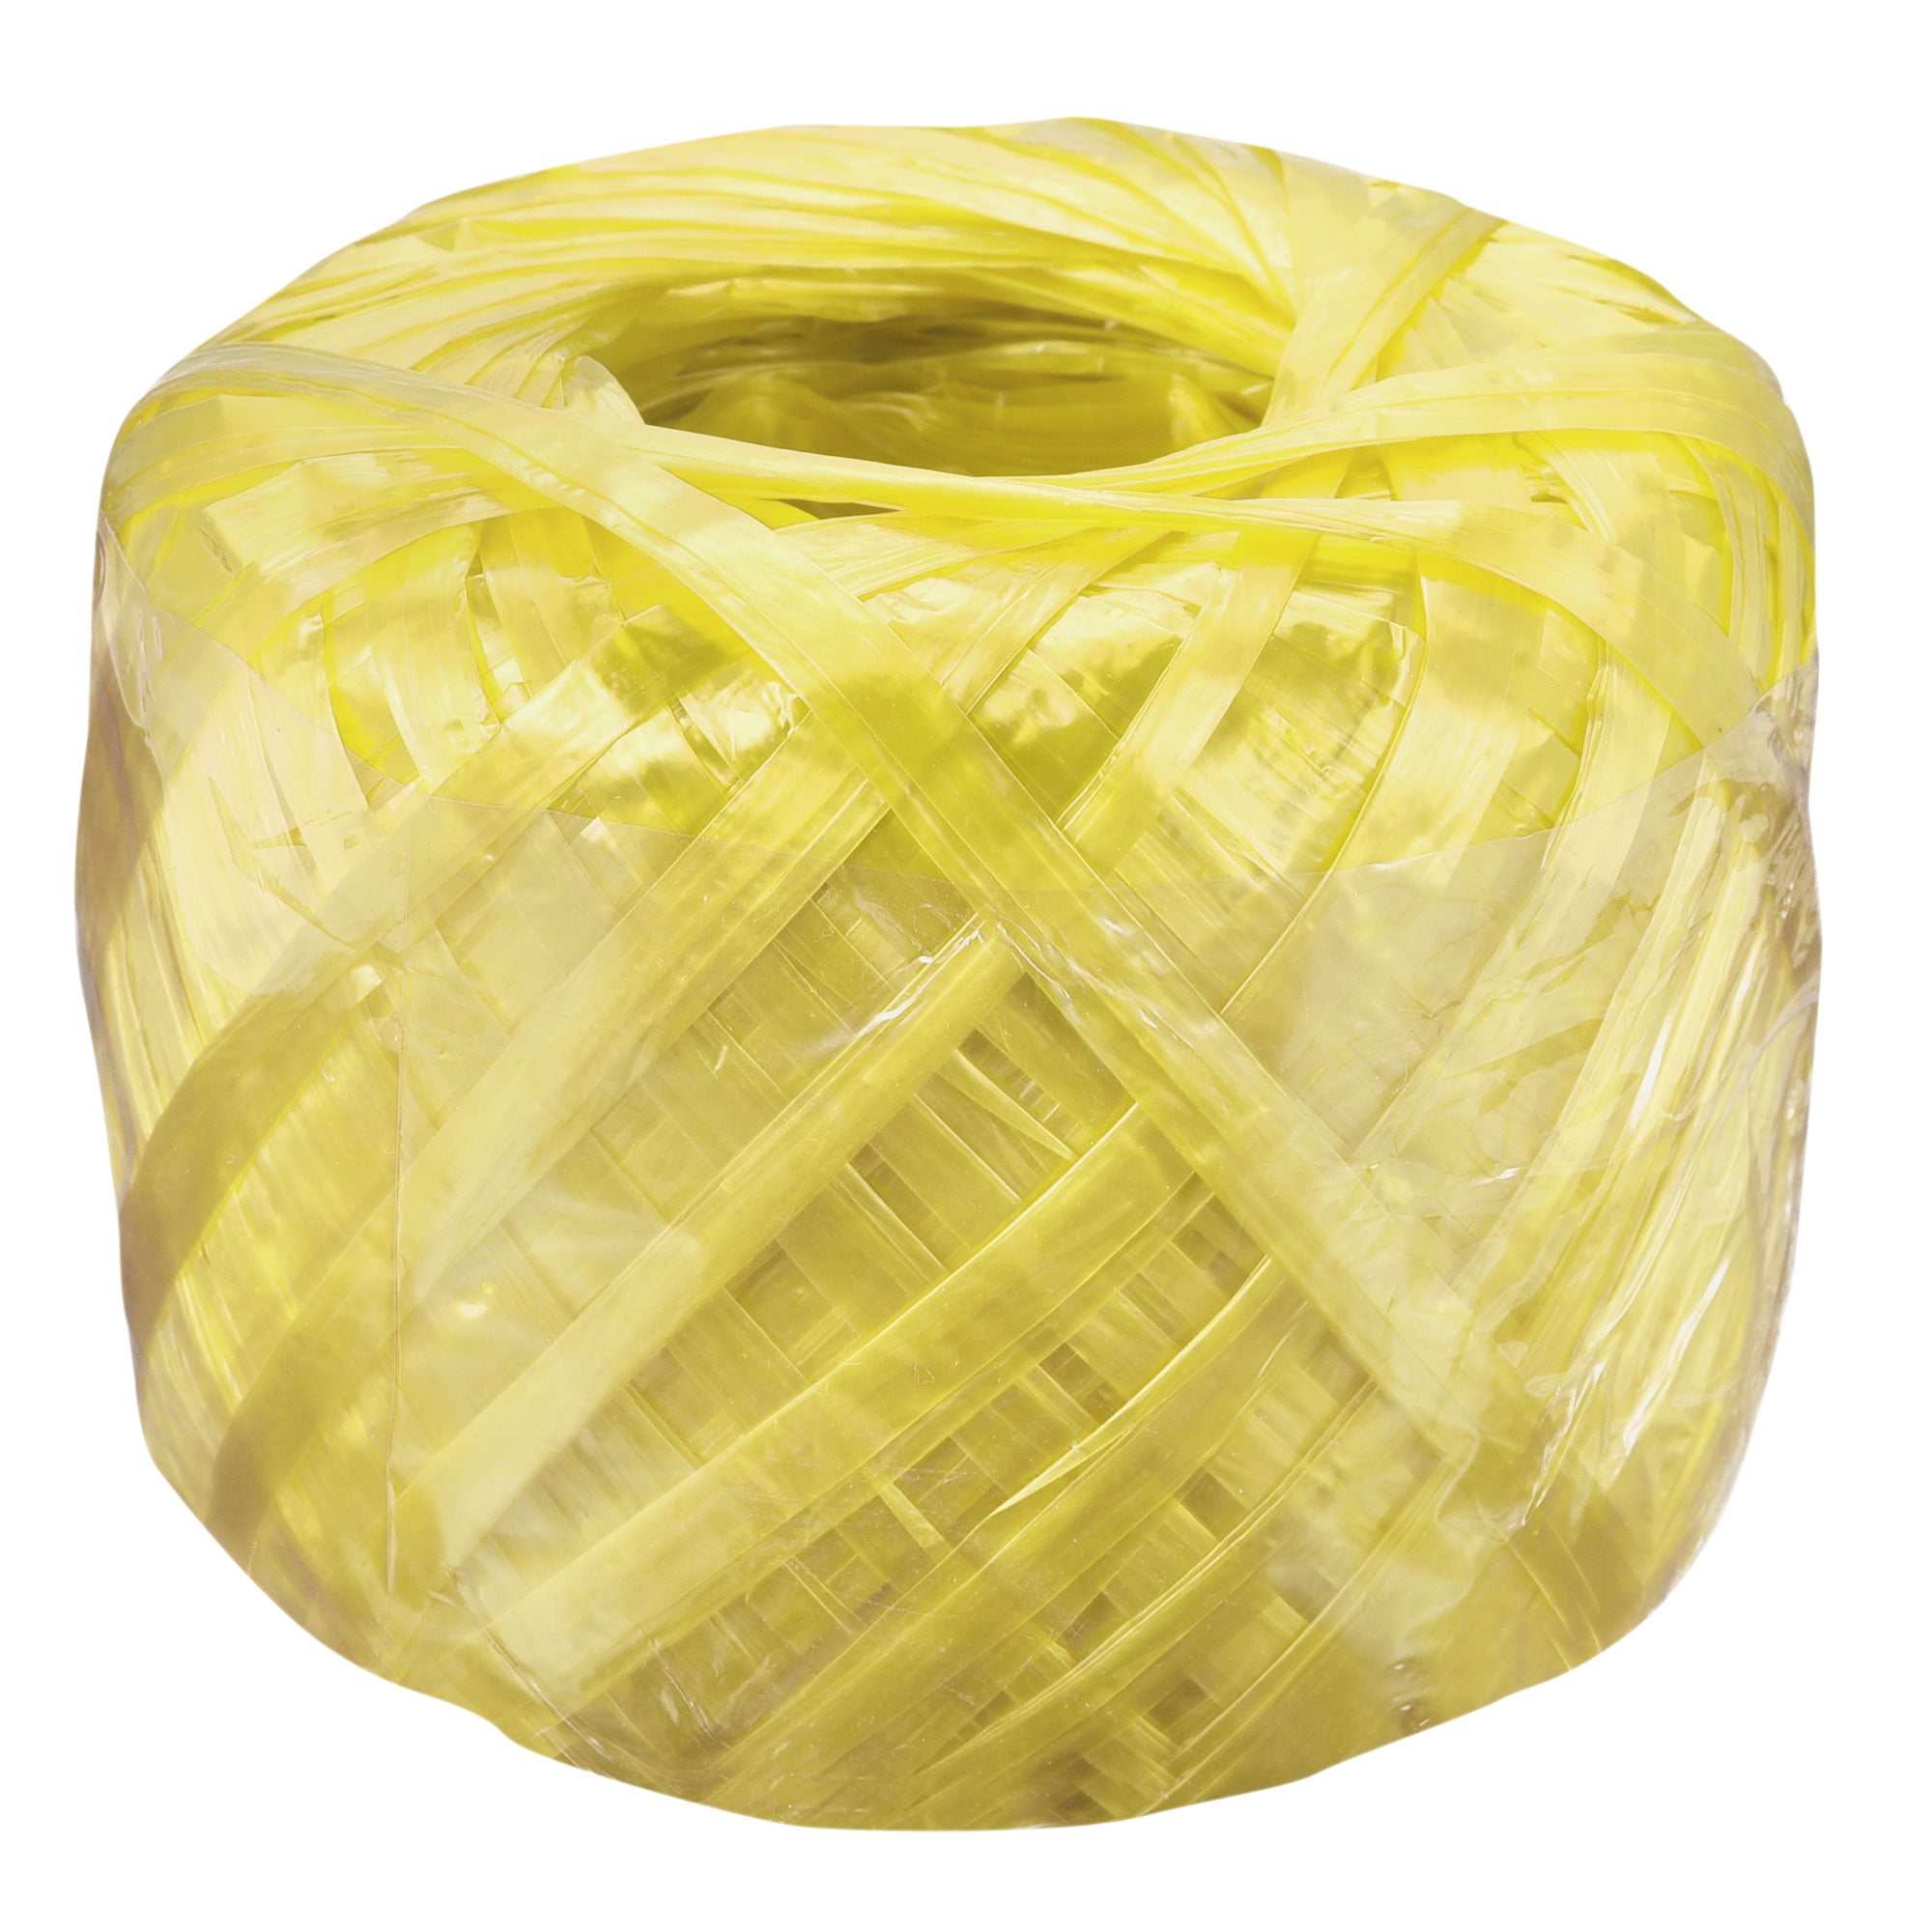 800m Length 2-3cm Width Polyester Nylon Plastic Rope Twine for  Packing,Carrying,Hanging,Gardening,Arts and Crafts, Bundling Parcels and  Wedding